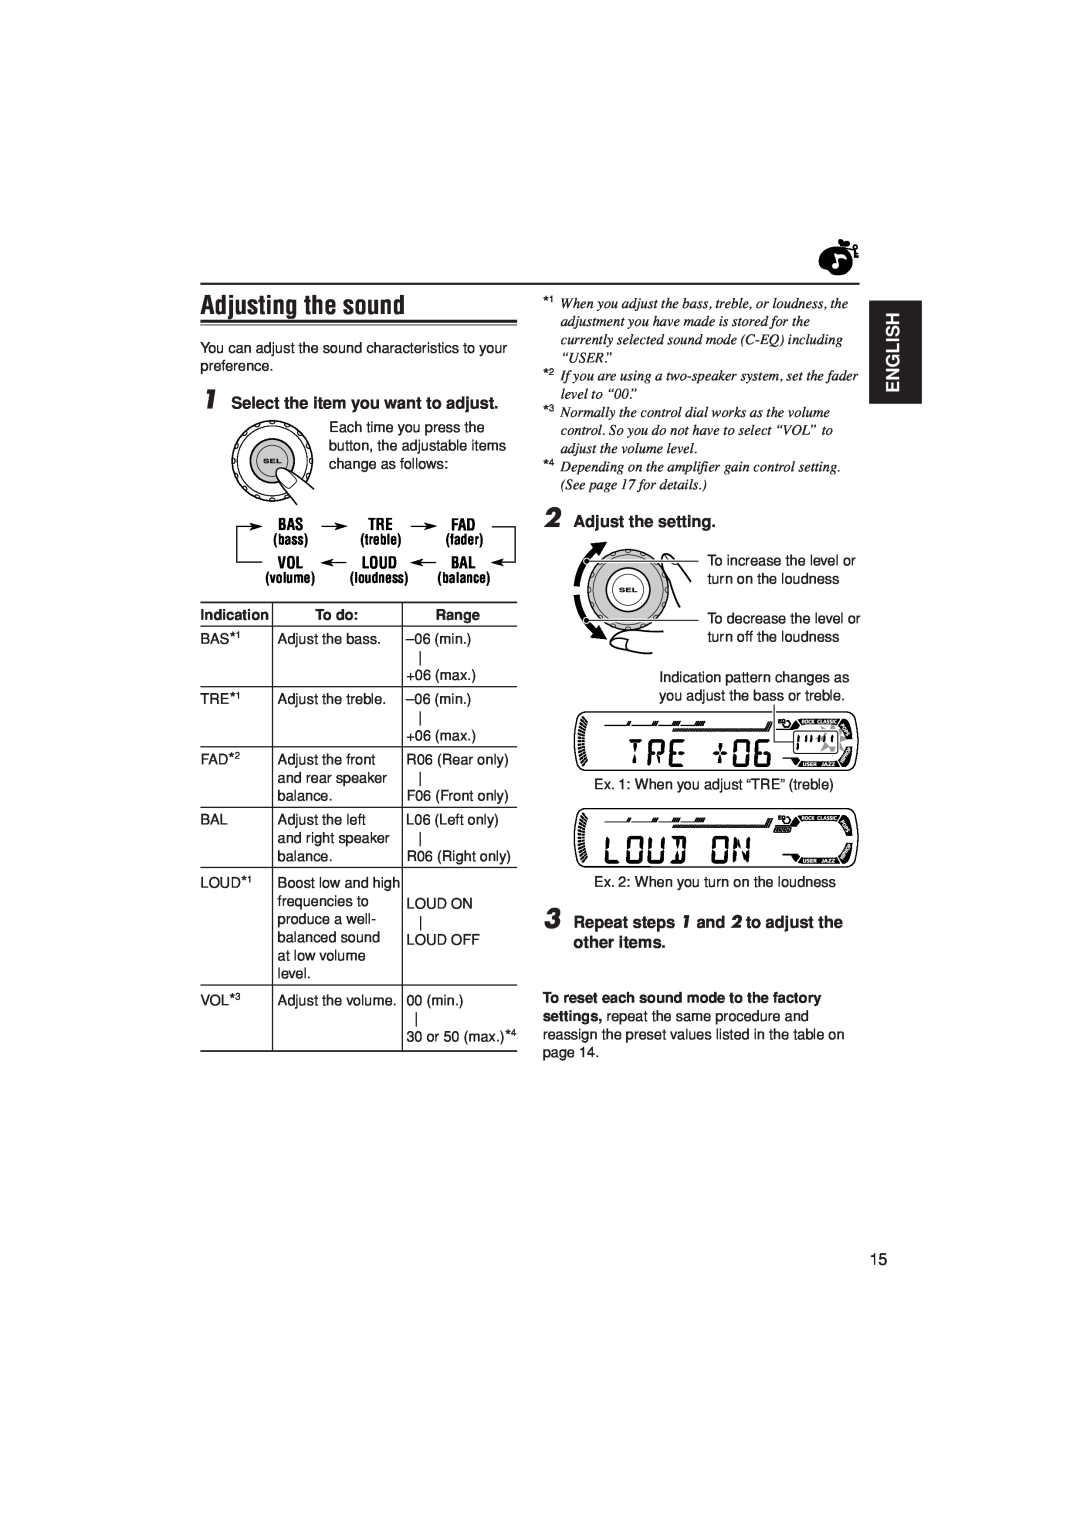 JVC KD-G201 Adjusting the sound, English, Select the item you want to adjust, Adjust the setting, bass, volume, Indication 